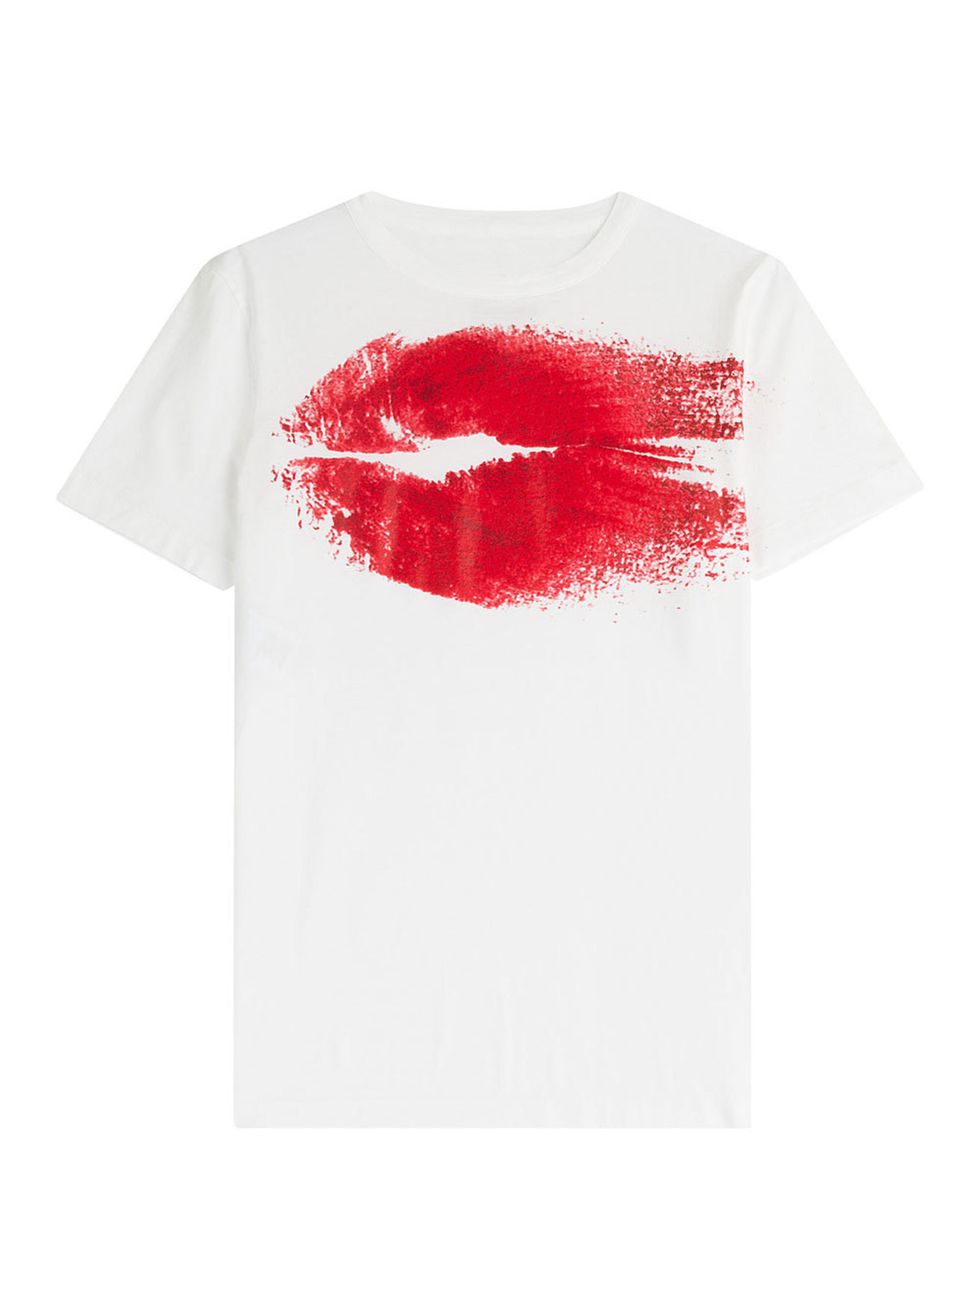 Lip, Product, Sleeve, Carmine, Maroon, Coquelicot, Active shirt, Top, Lipstick, Graphics, 